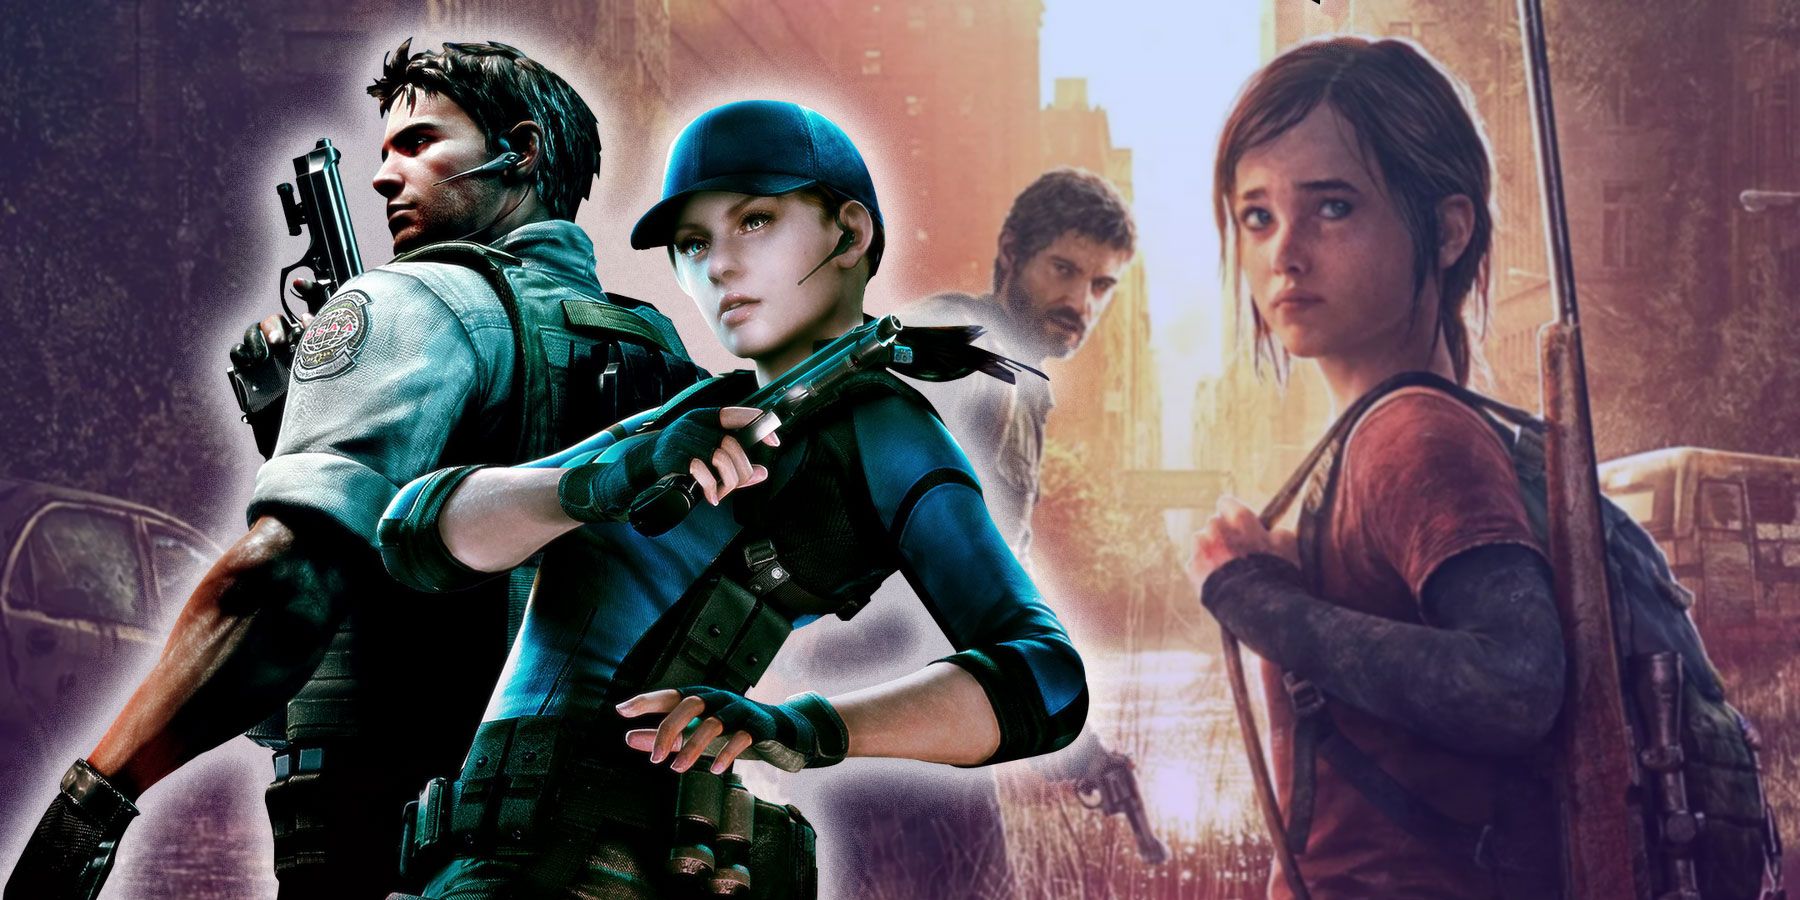 Chris Redfield and Jill Valentine in front of promotional art for The Last of Us.